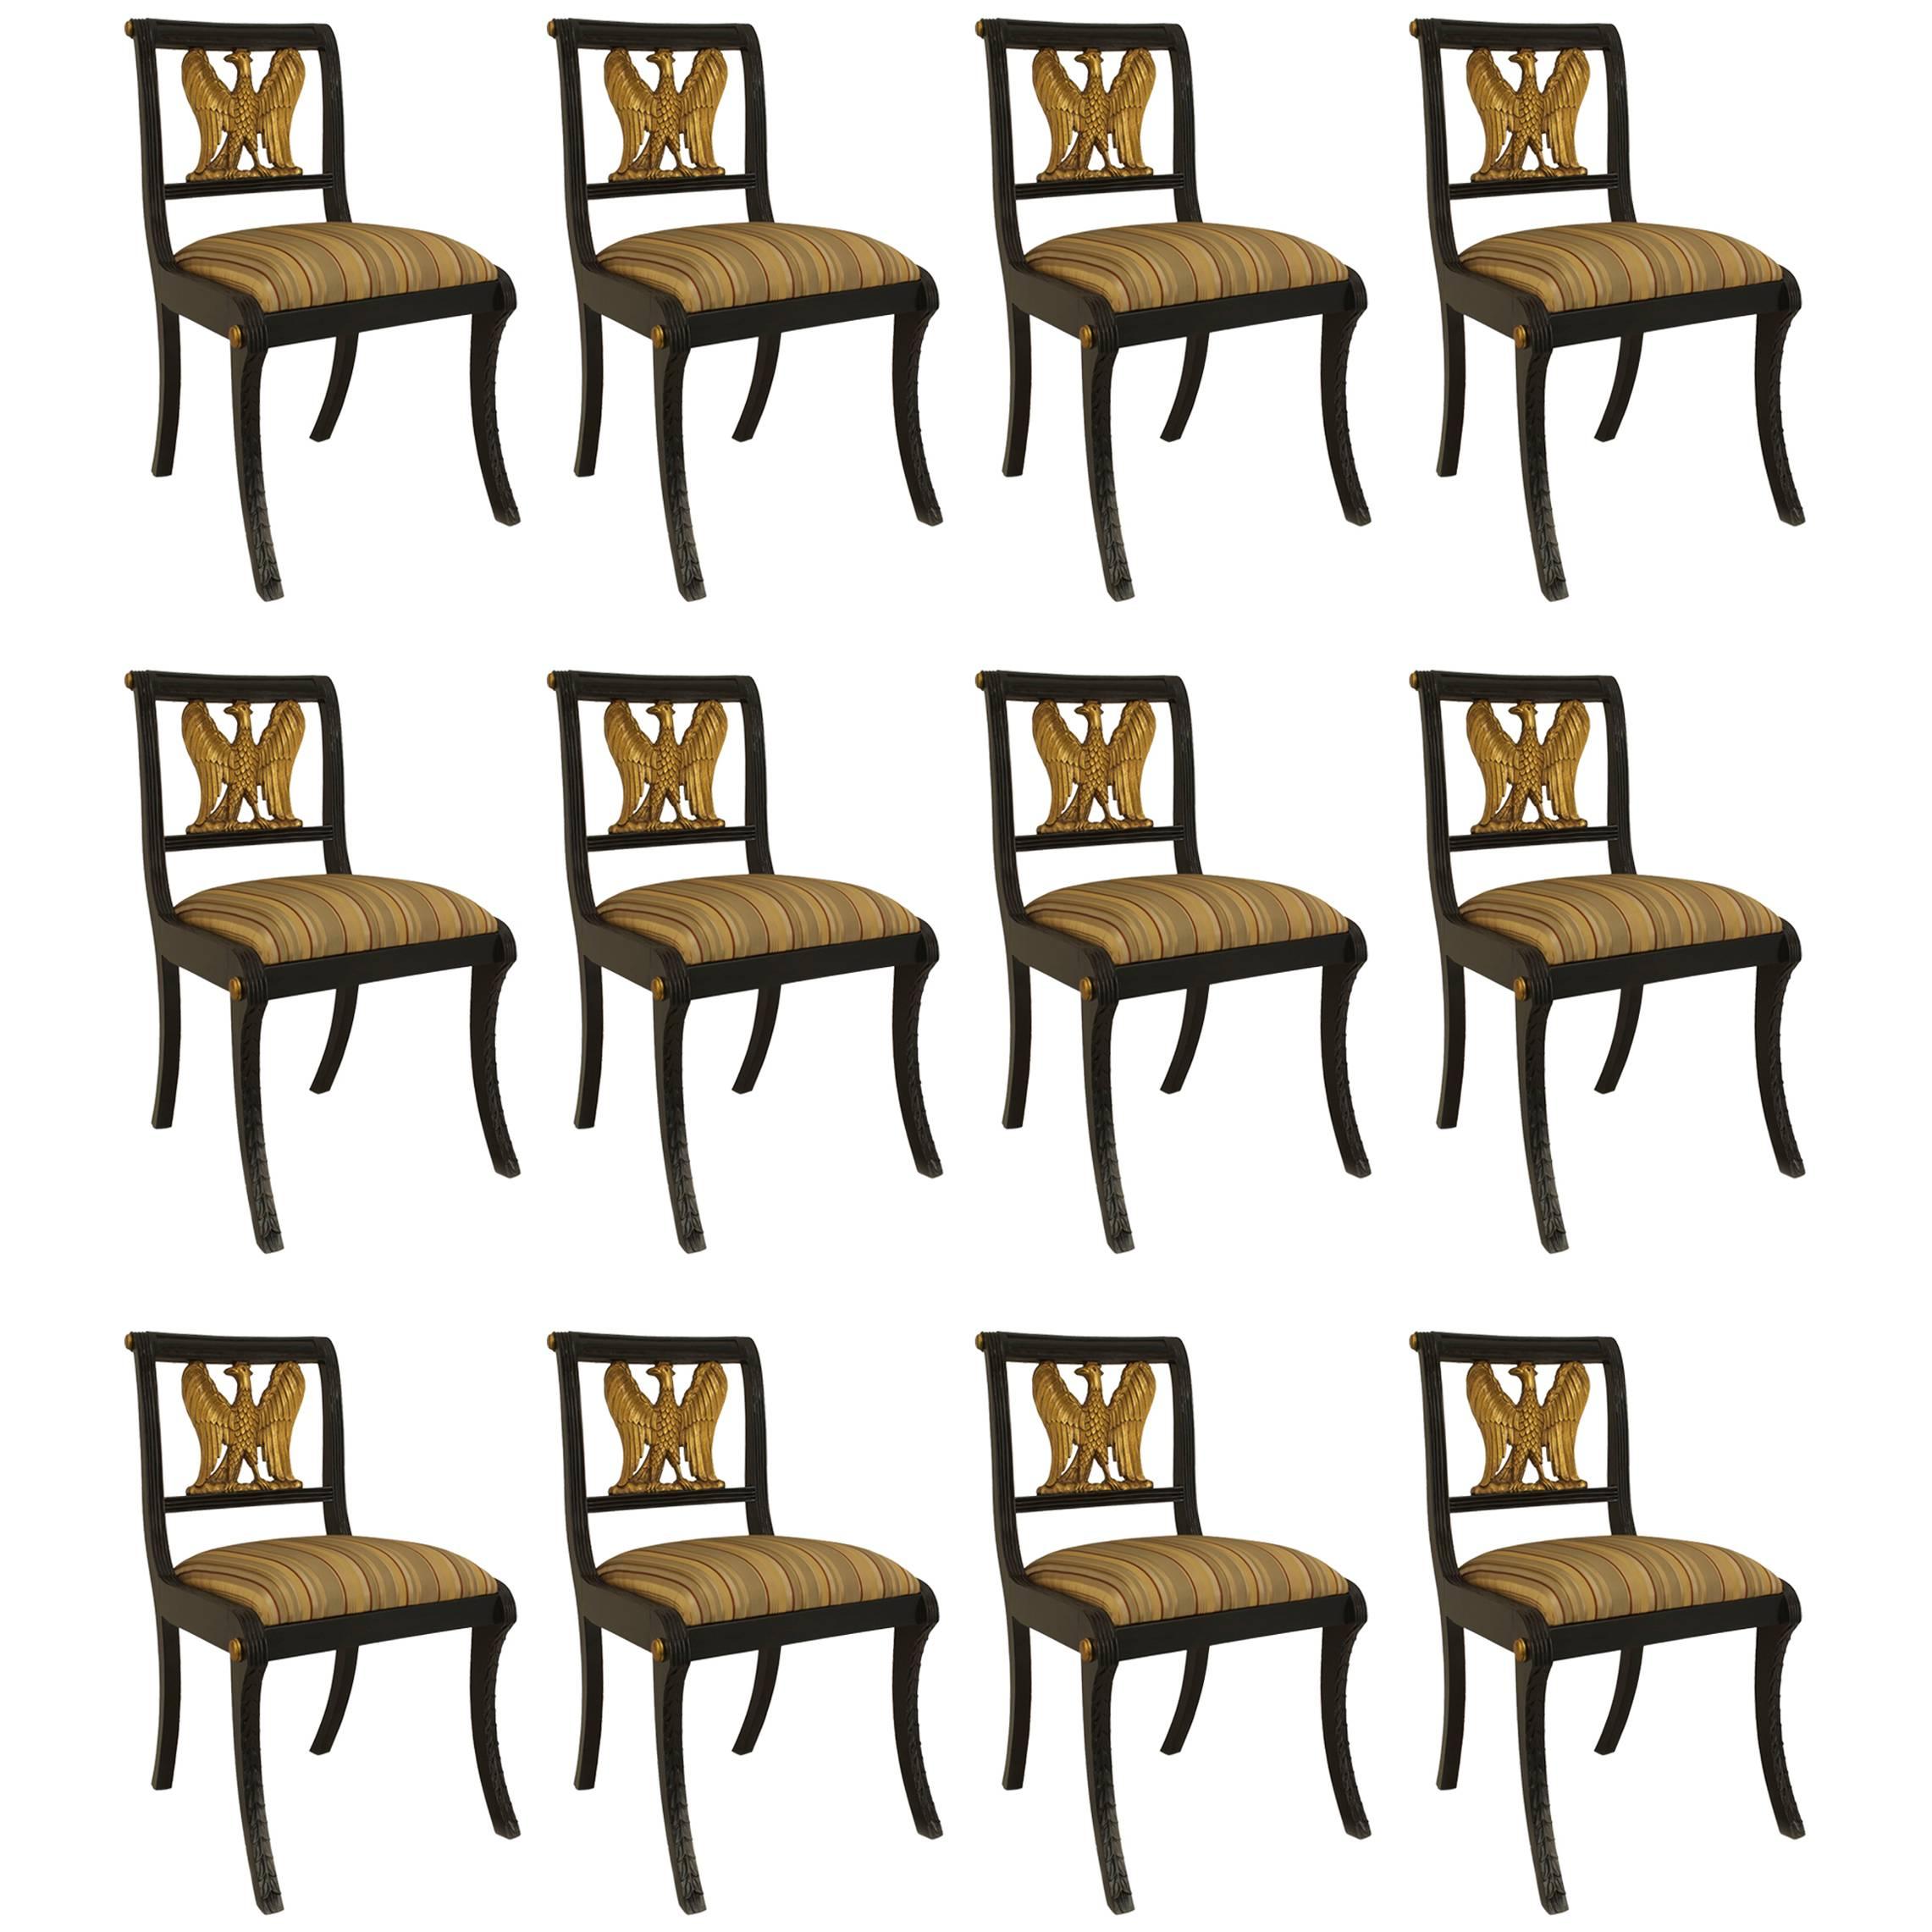 Set of 12 American Federal Gilt Eagle Side Chairs